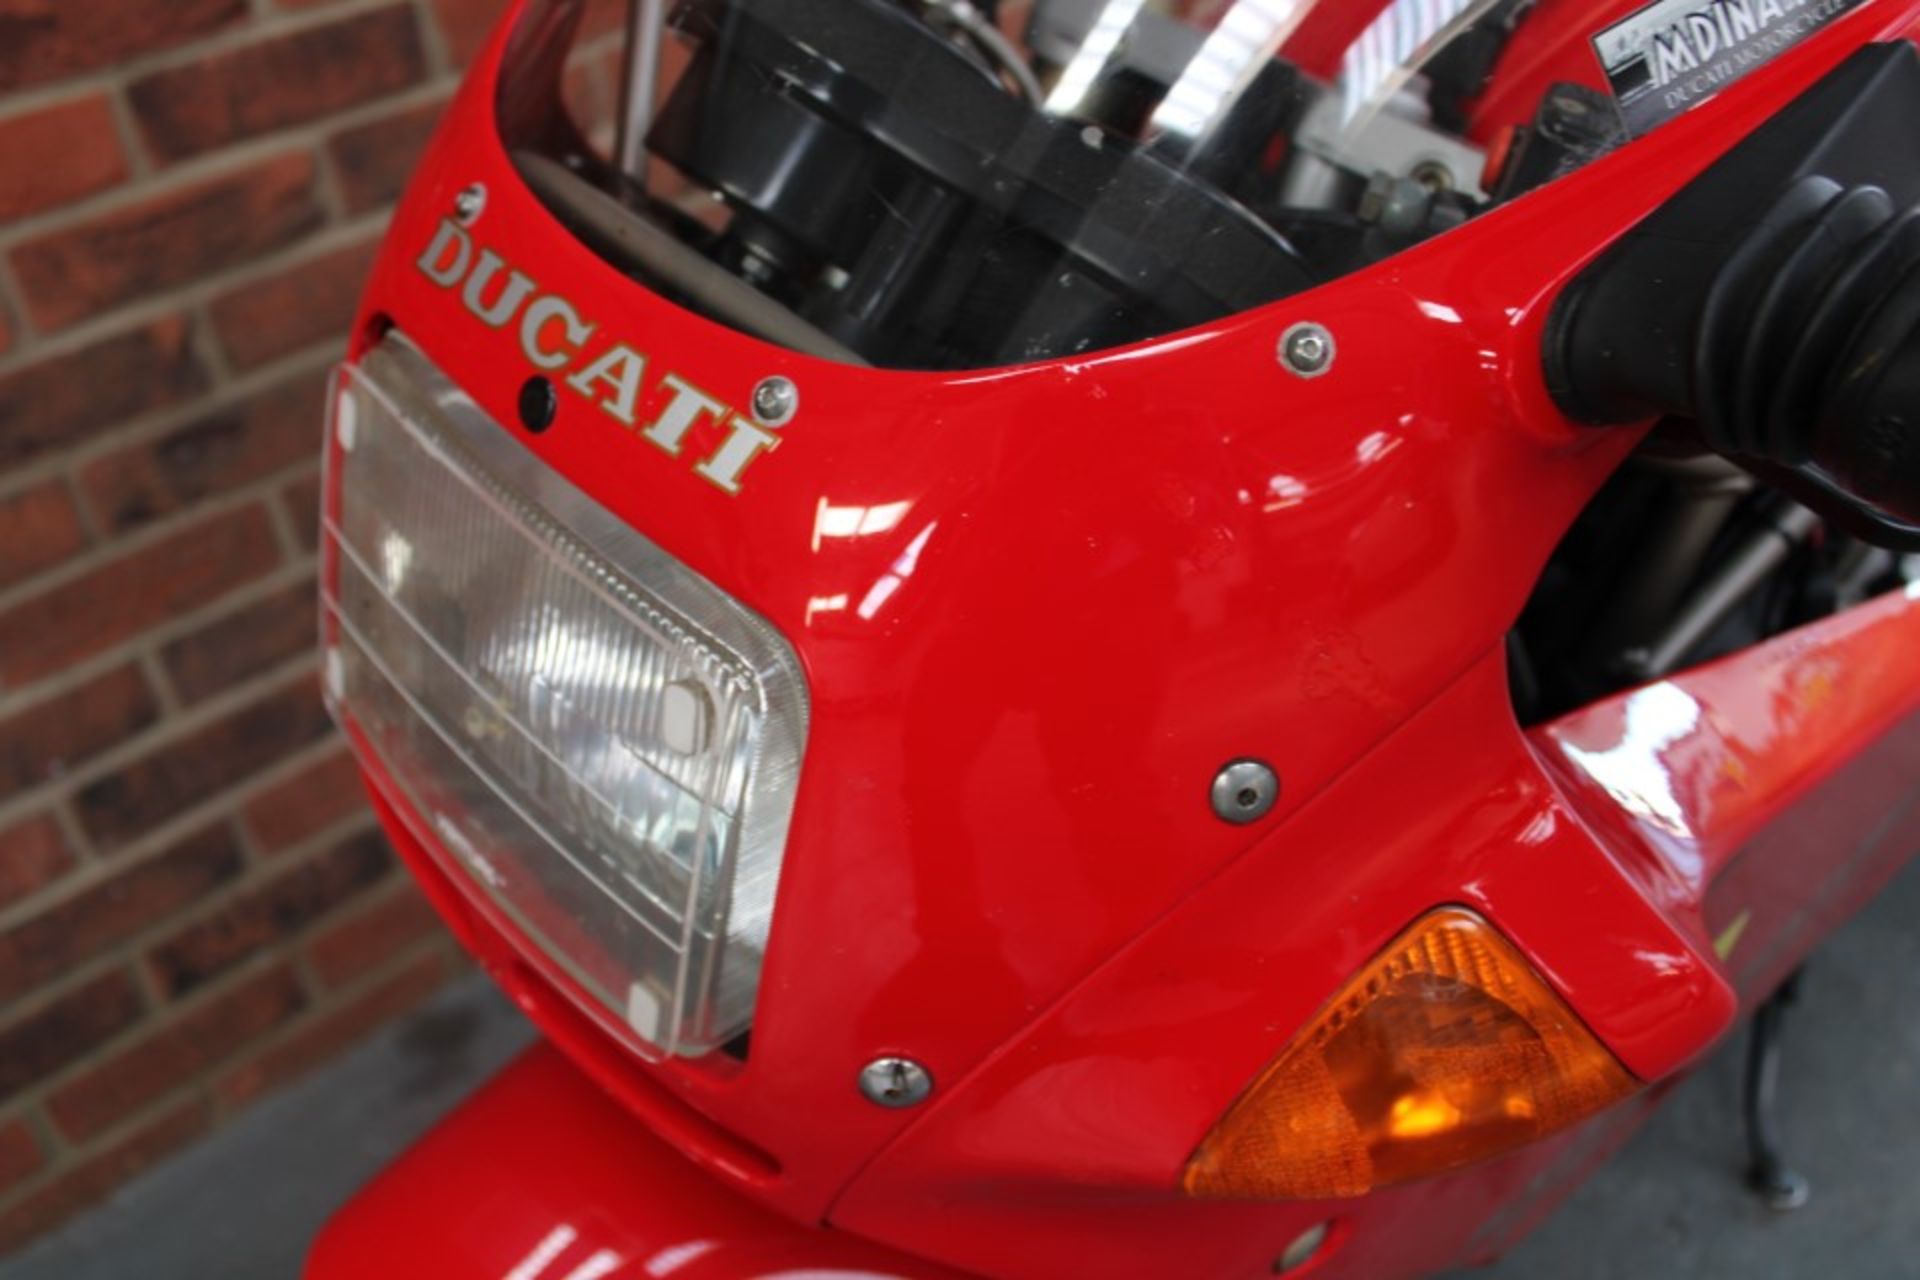 1994 Ducati 750 SS Supersport - Image 6 of 16